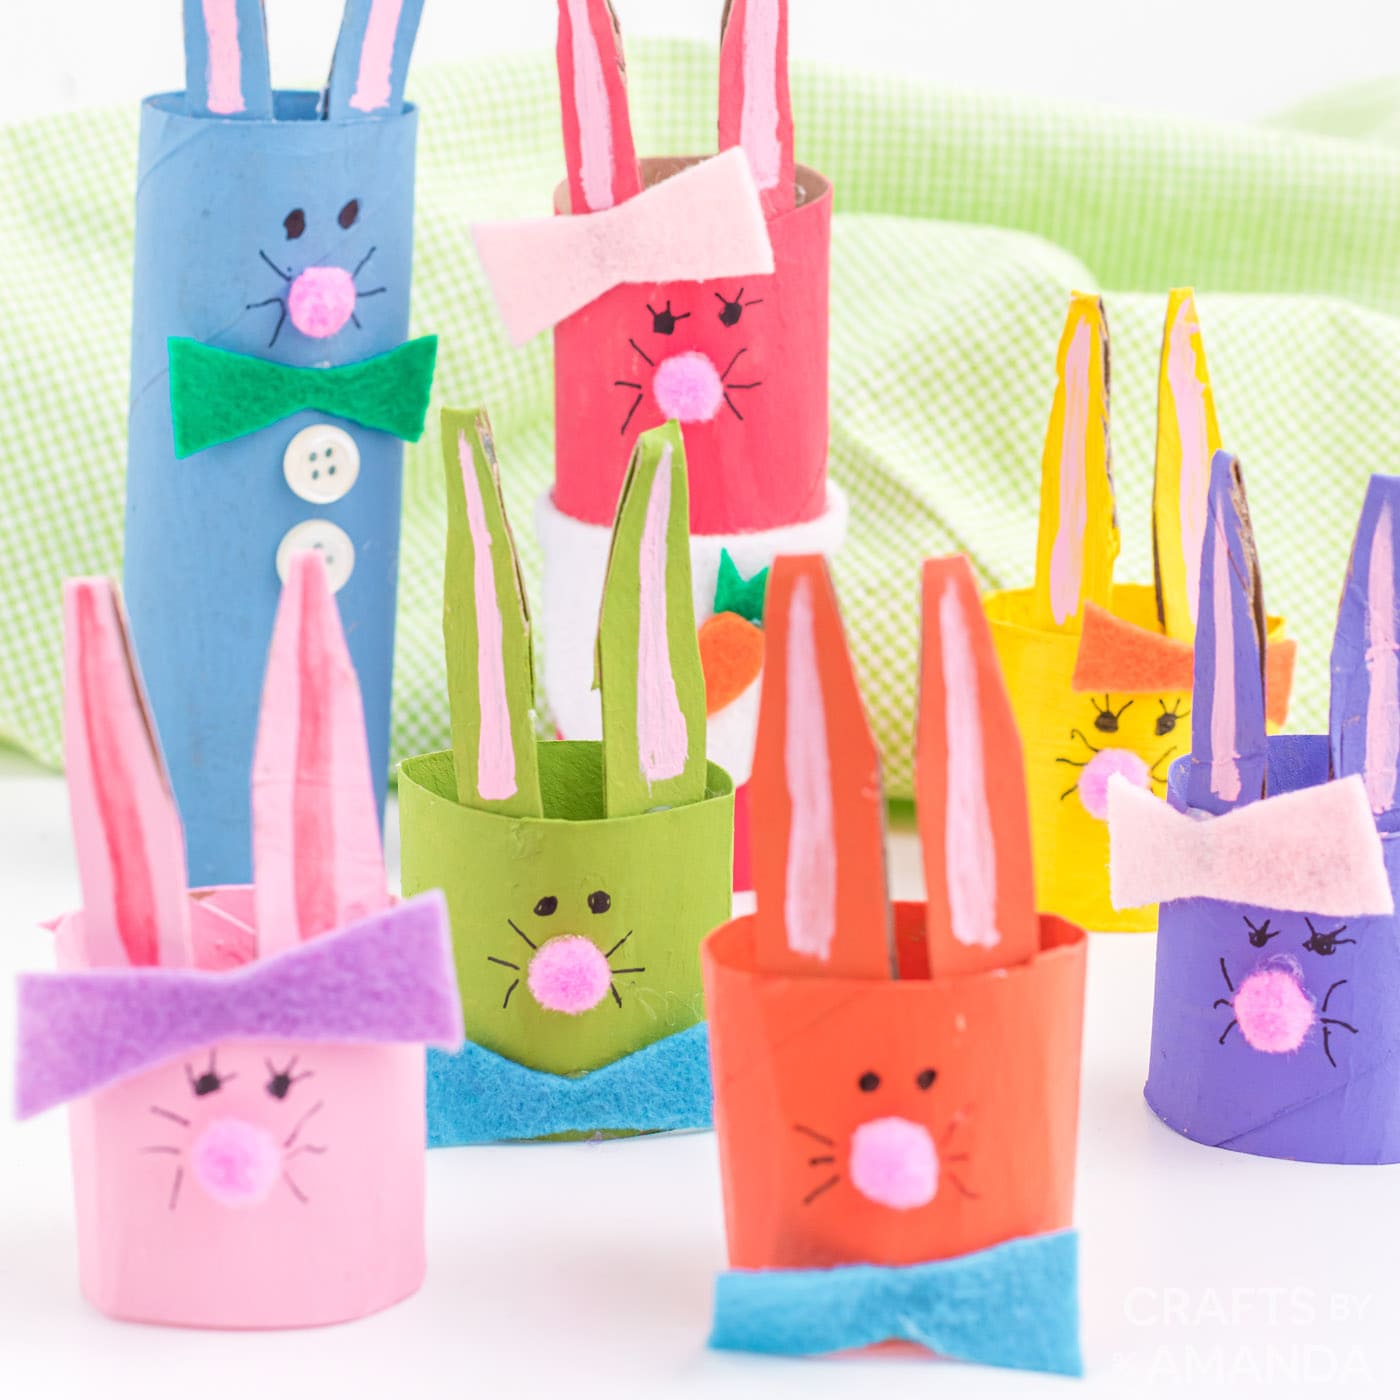 Animal Craft Ideas for Kids - from Crafts by Amanda